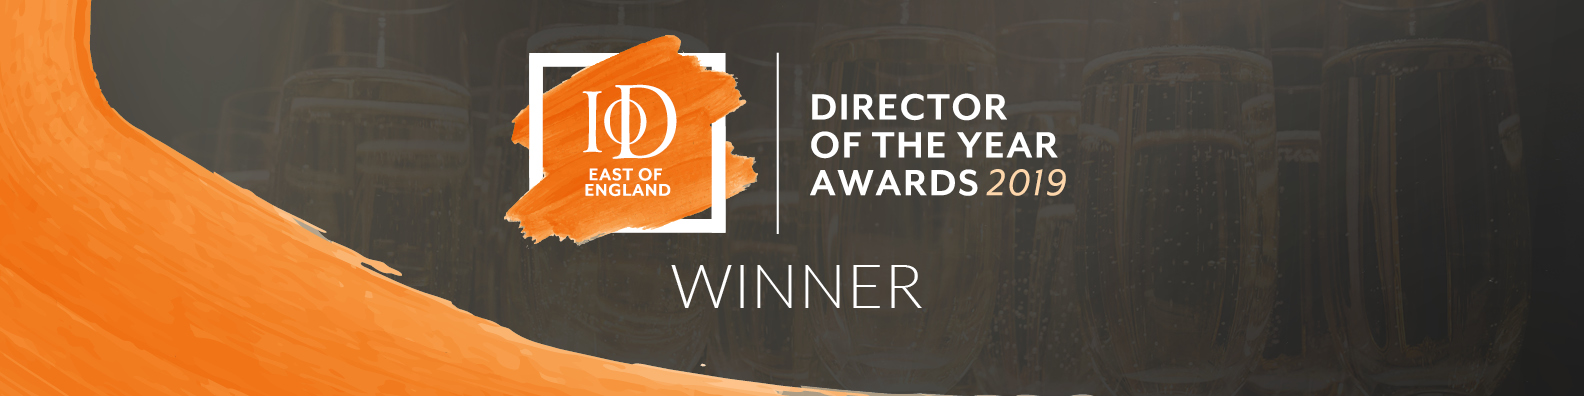 IoD 2019 East Of England Director Of The Year Winner